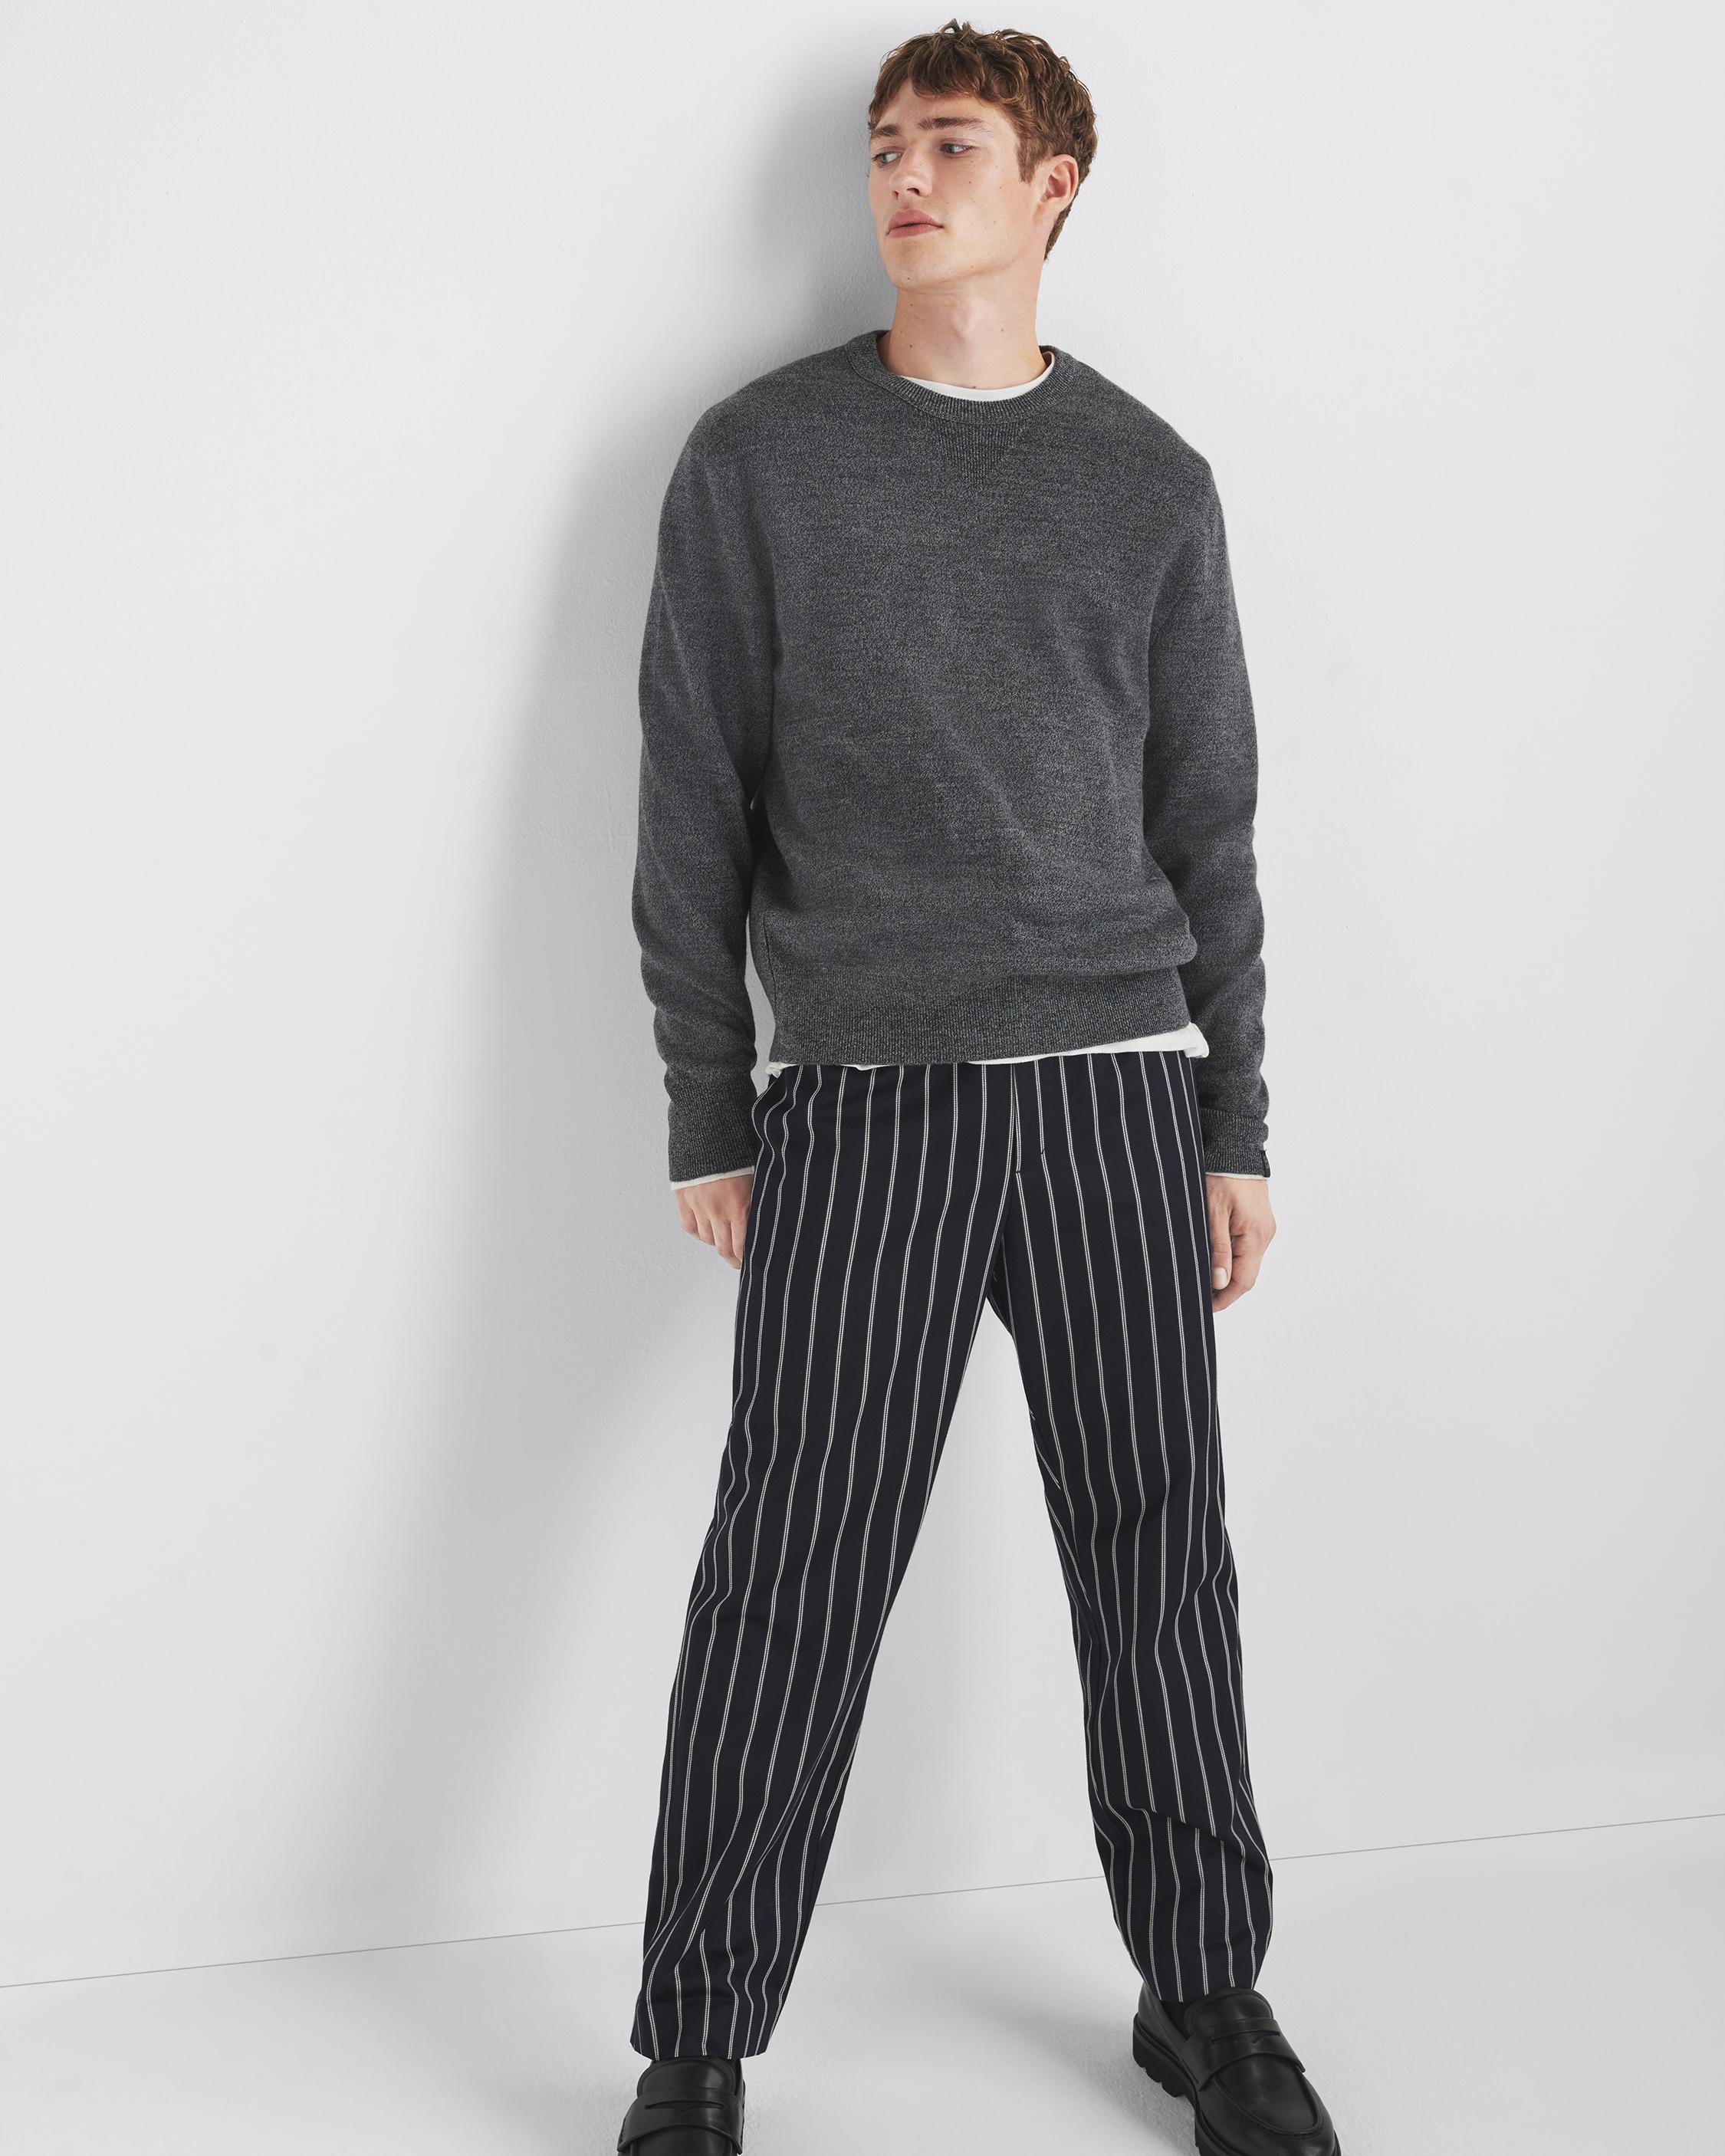 York Wool Crew
Relaxed Fit - 2